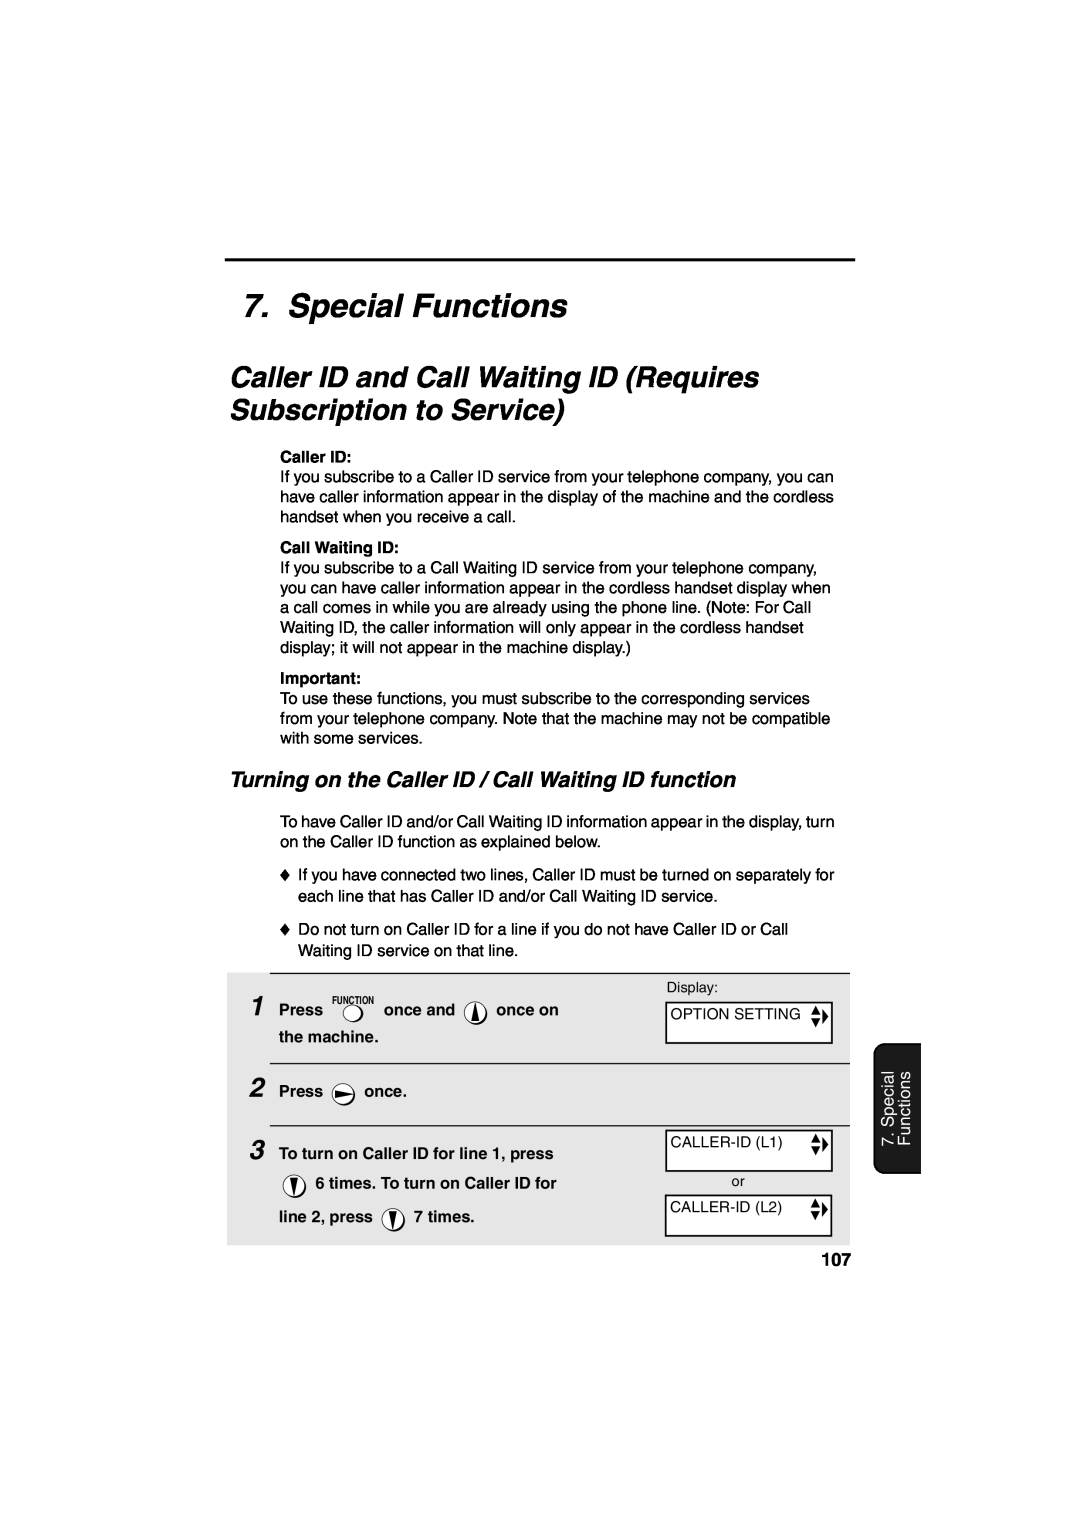 Sharp UX-CD600 operation manual Special Functions, Caller ID and Call Waiting ID Requires Subscription to Service 